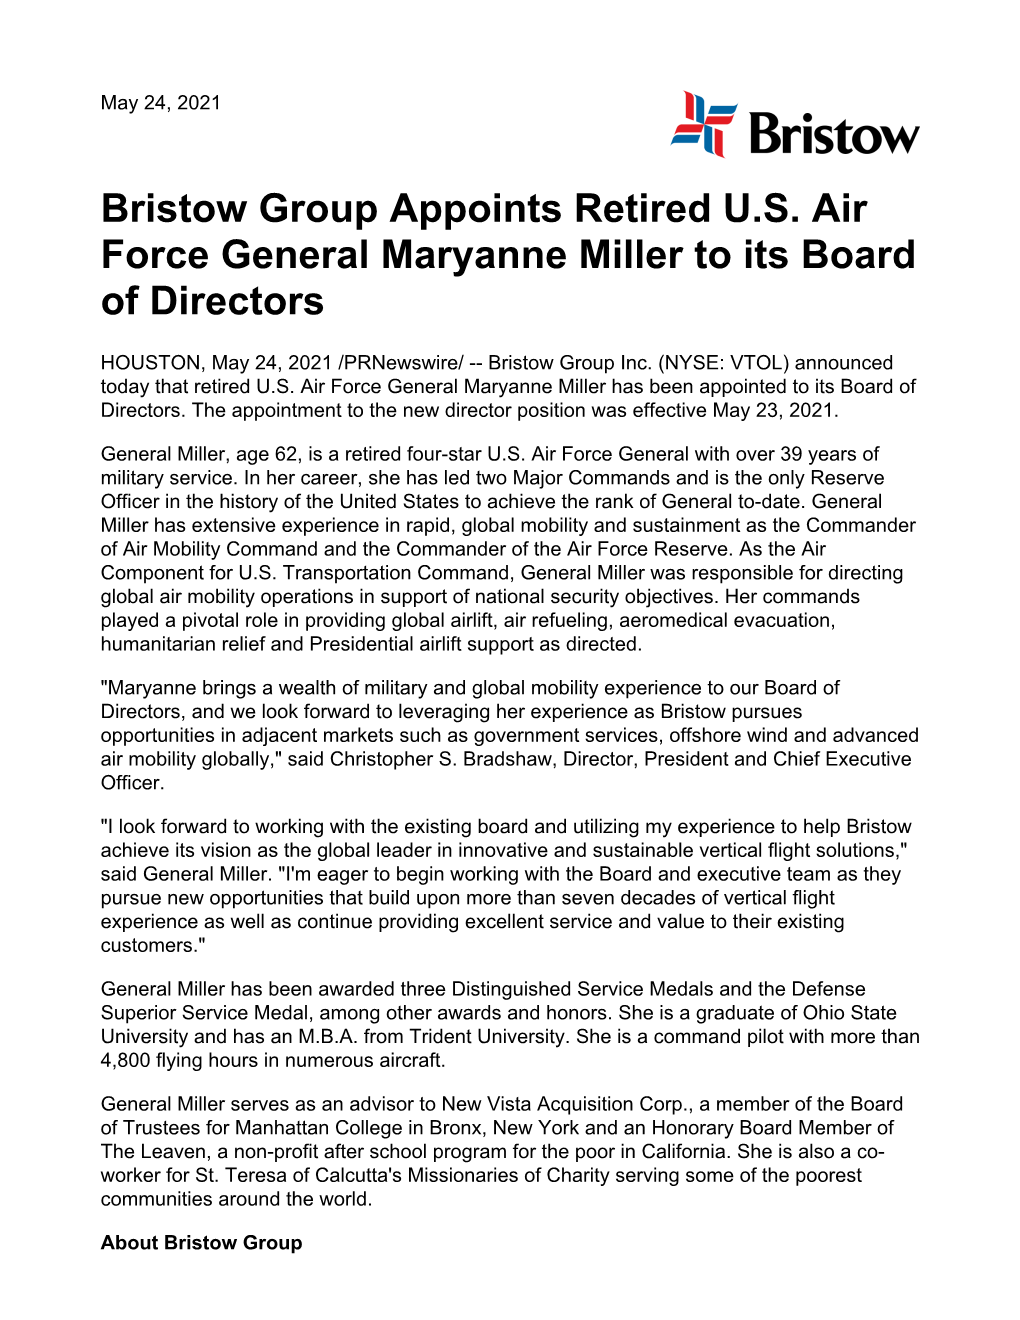 Bristow Group Appoints Retired U.S. Air Force General Maryanne Miller to Its Board of Directors